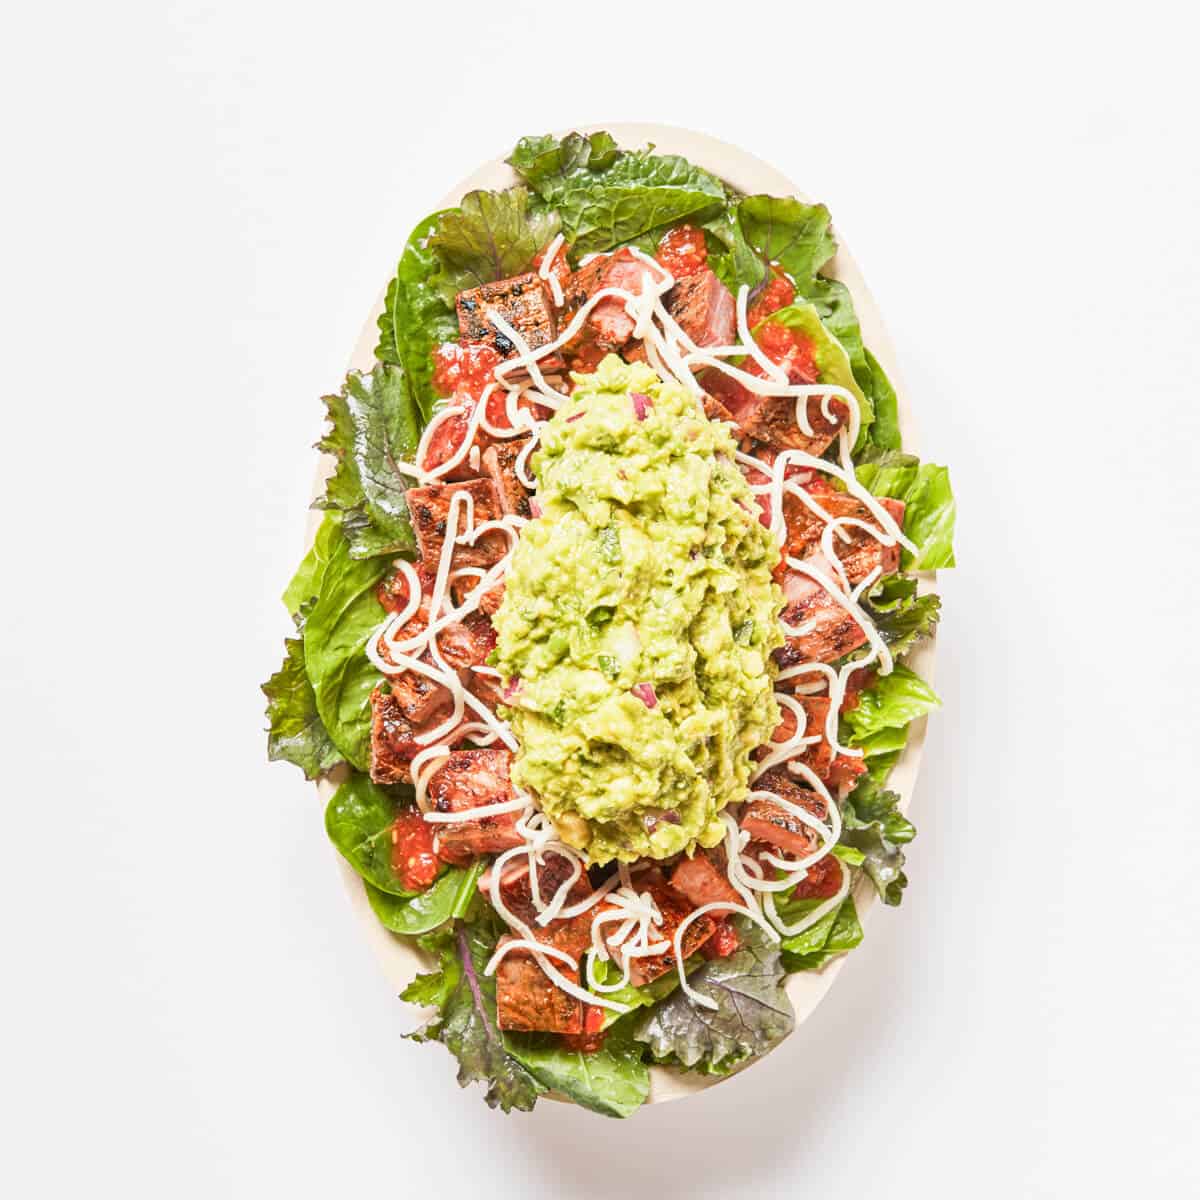 Keto Friendly Chipotle Options – Your Guide to Ordering